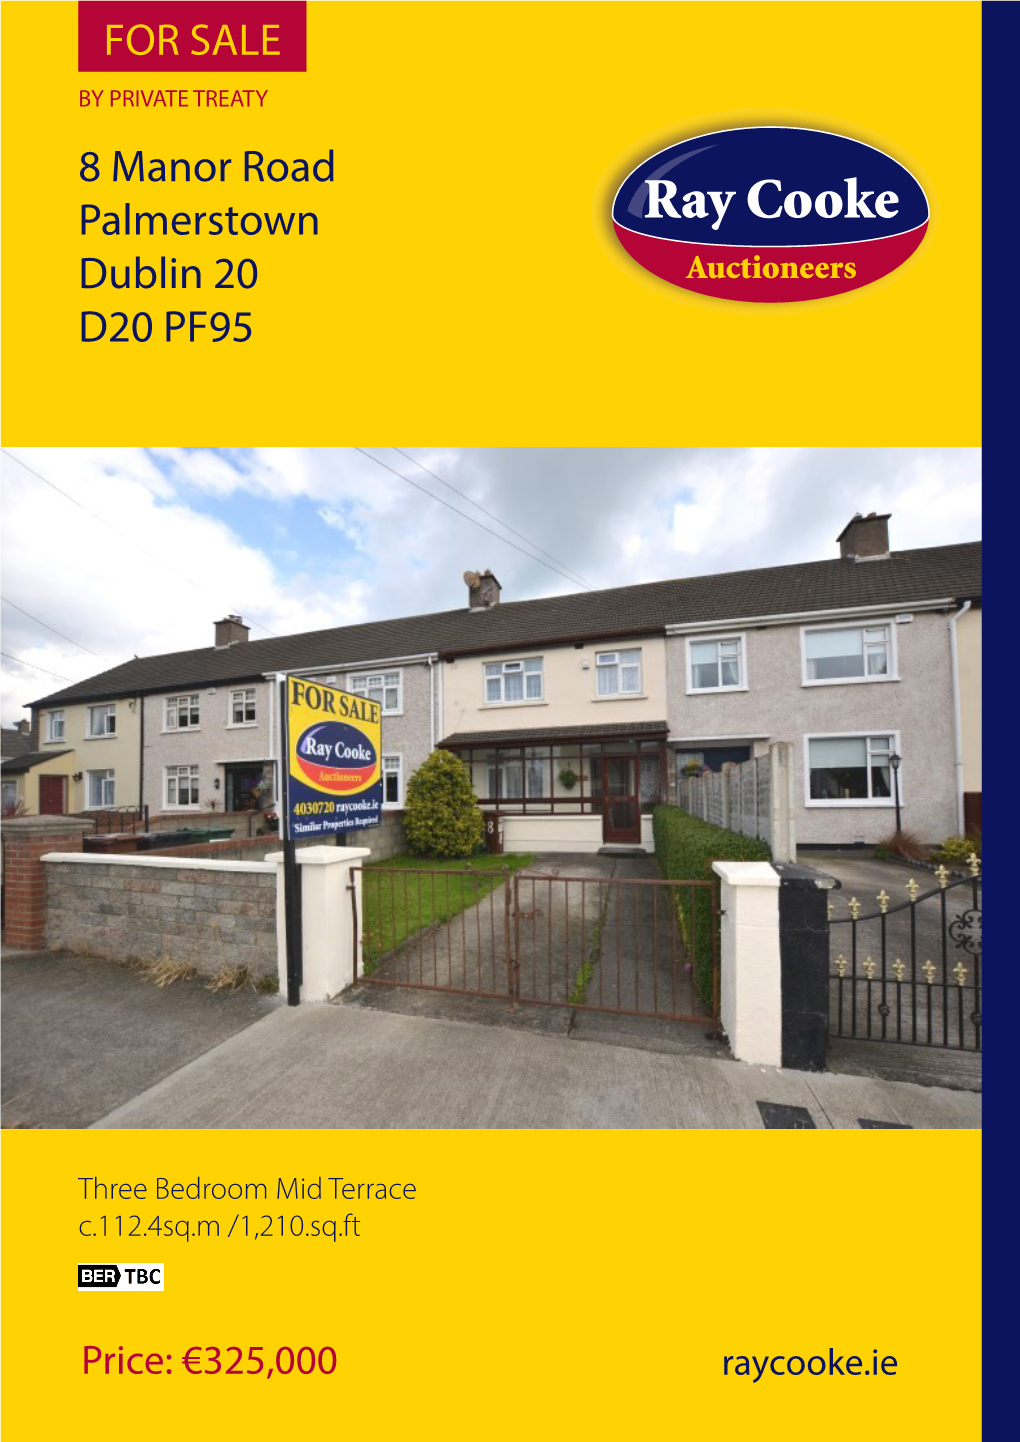 8 Manor Road Palmerstown Dublin 20 D20 PF95 for SALE